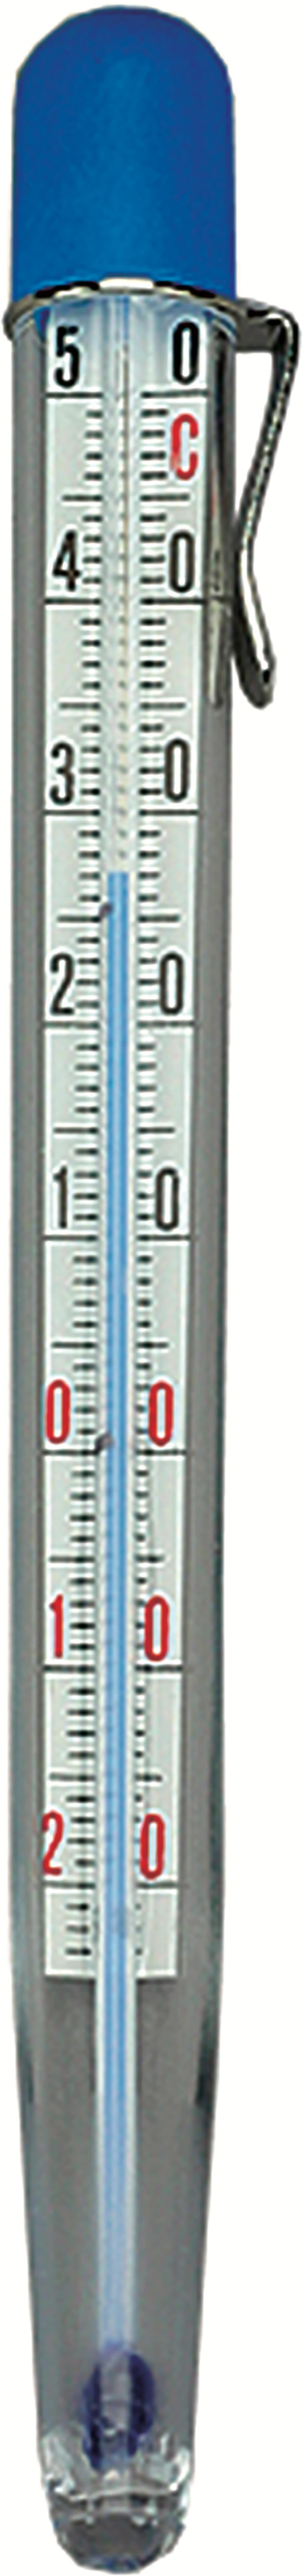 Thermometer 160004